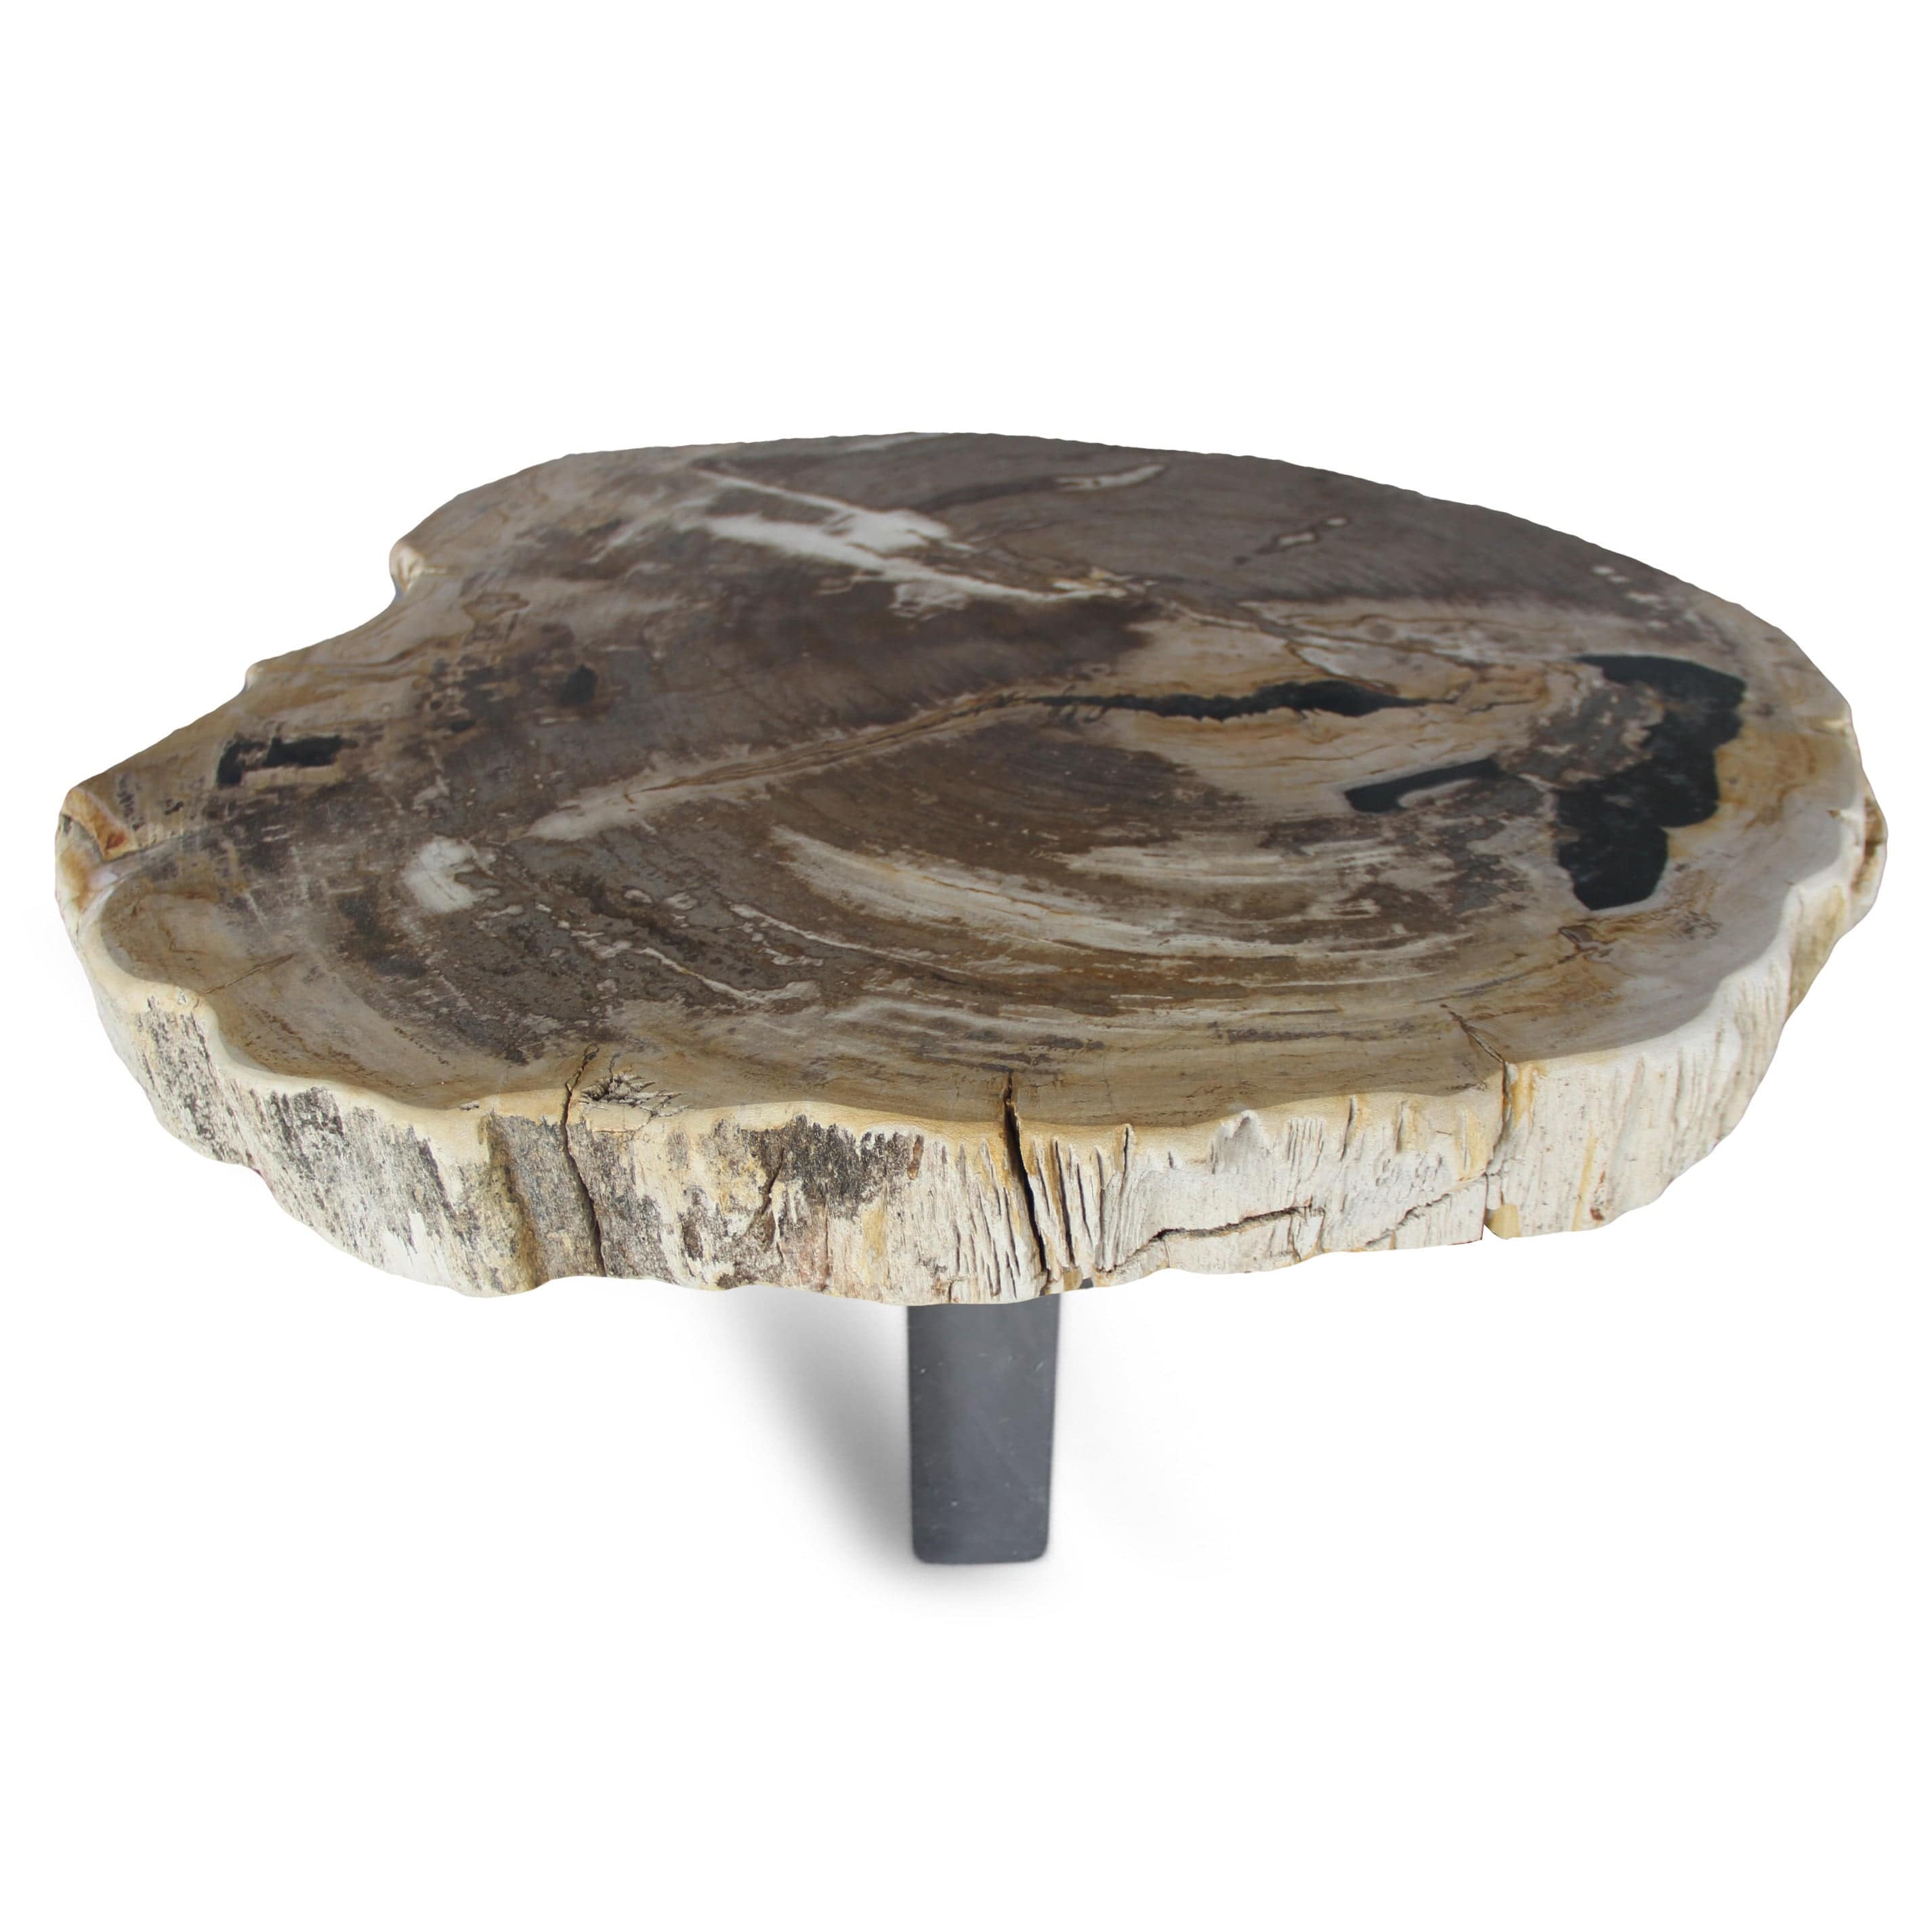 Kalifano Petrified Wood Petrified Wood Round Slab Coffee Table from Indonesia - 31" / 172 lbs PWT6400.003